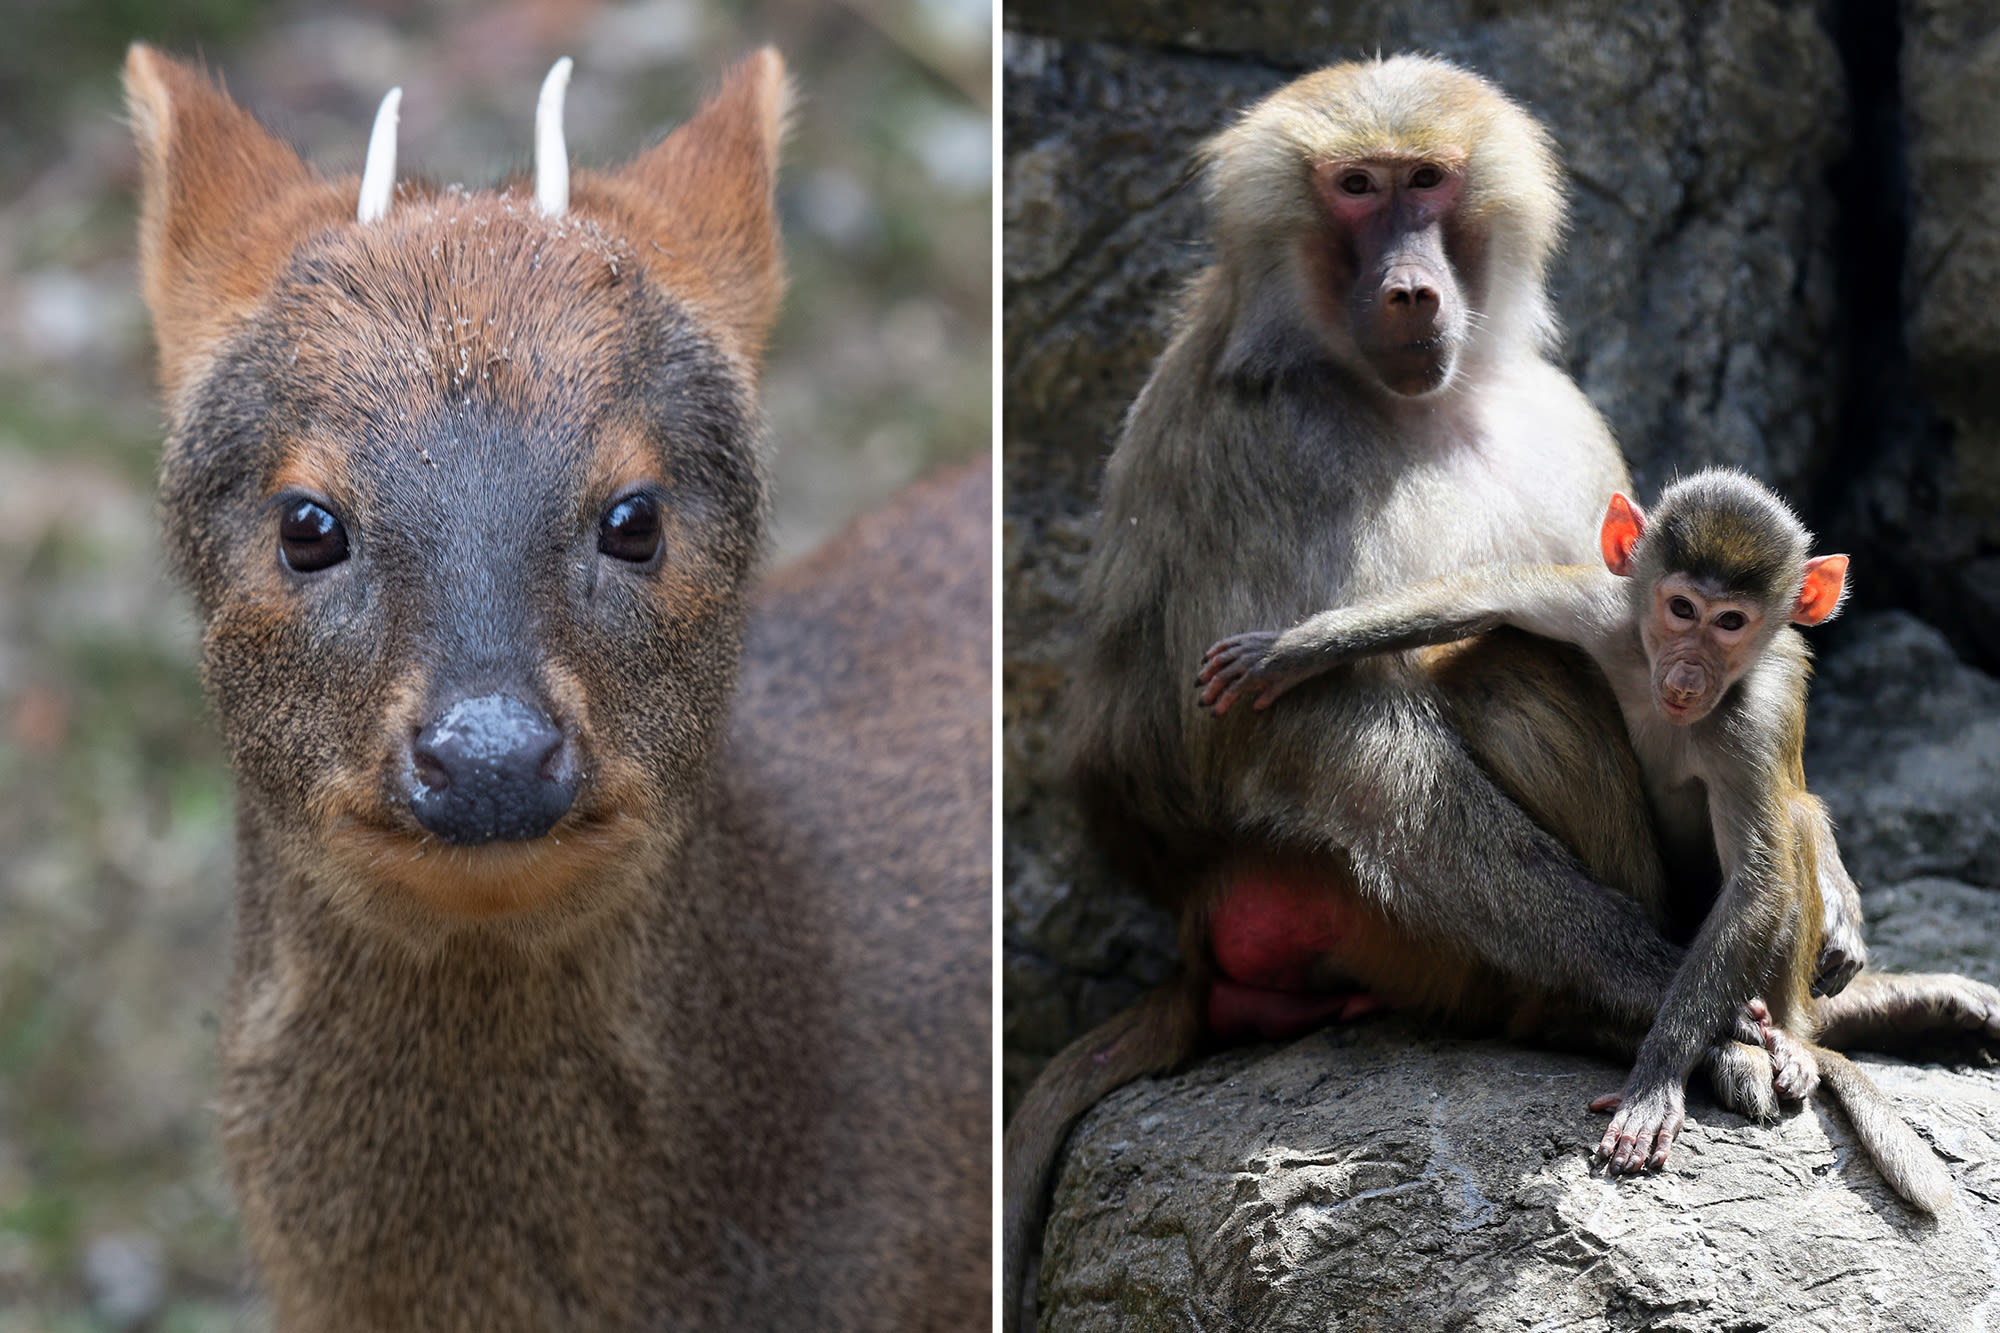 Brooklyn’s Prospect Park Zoo re-opens with adorable new baby animals and this rare species